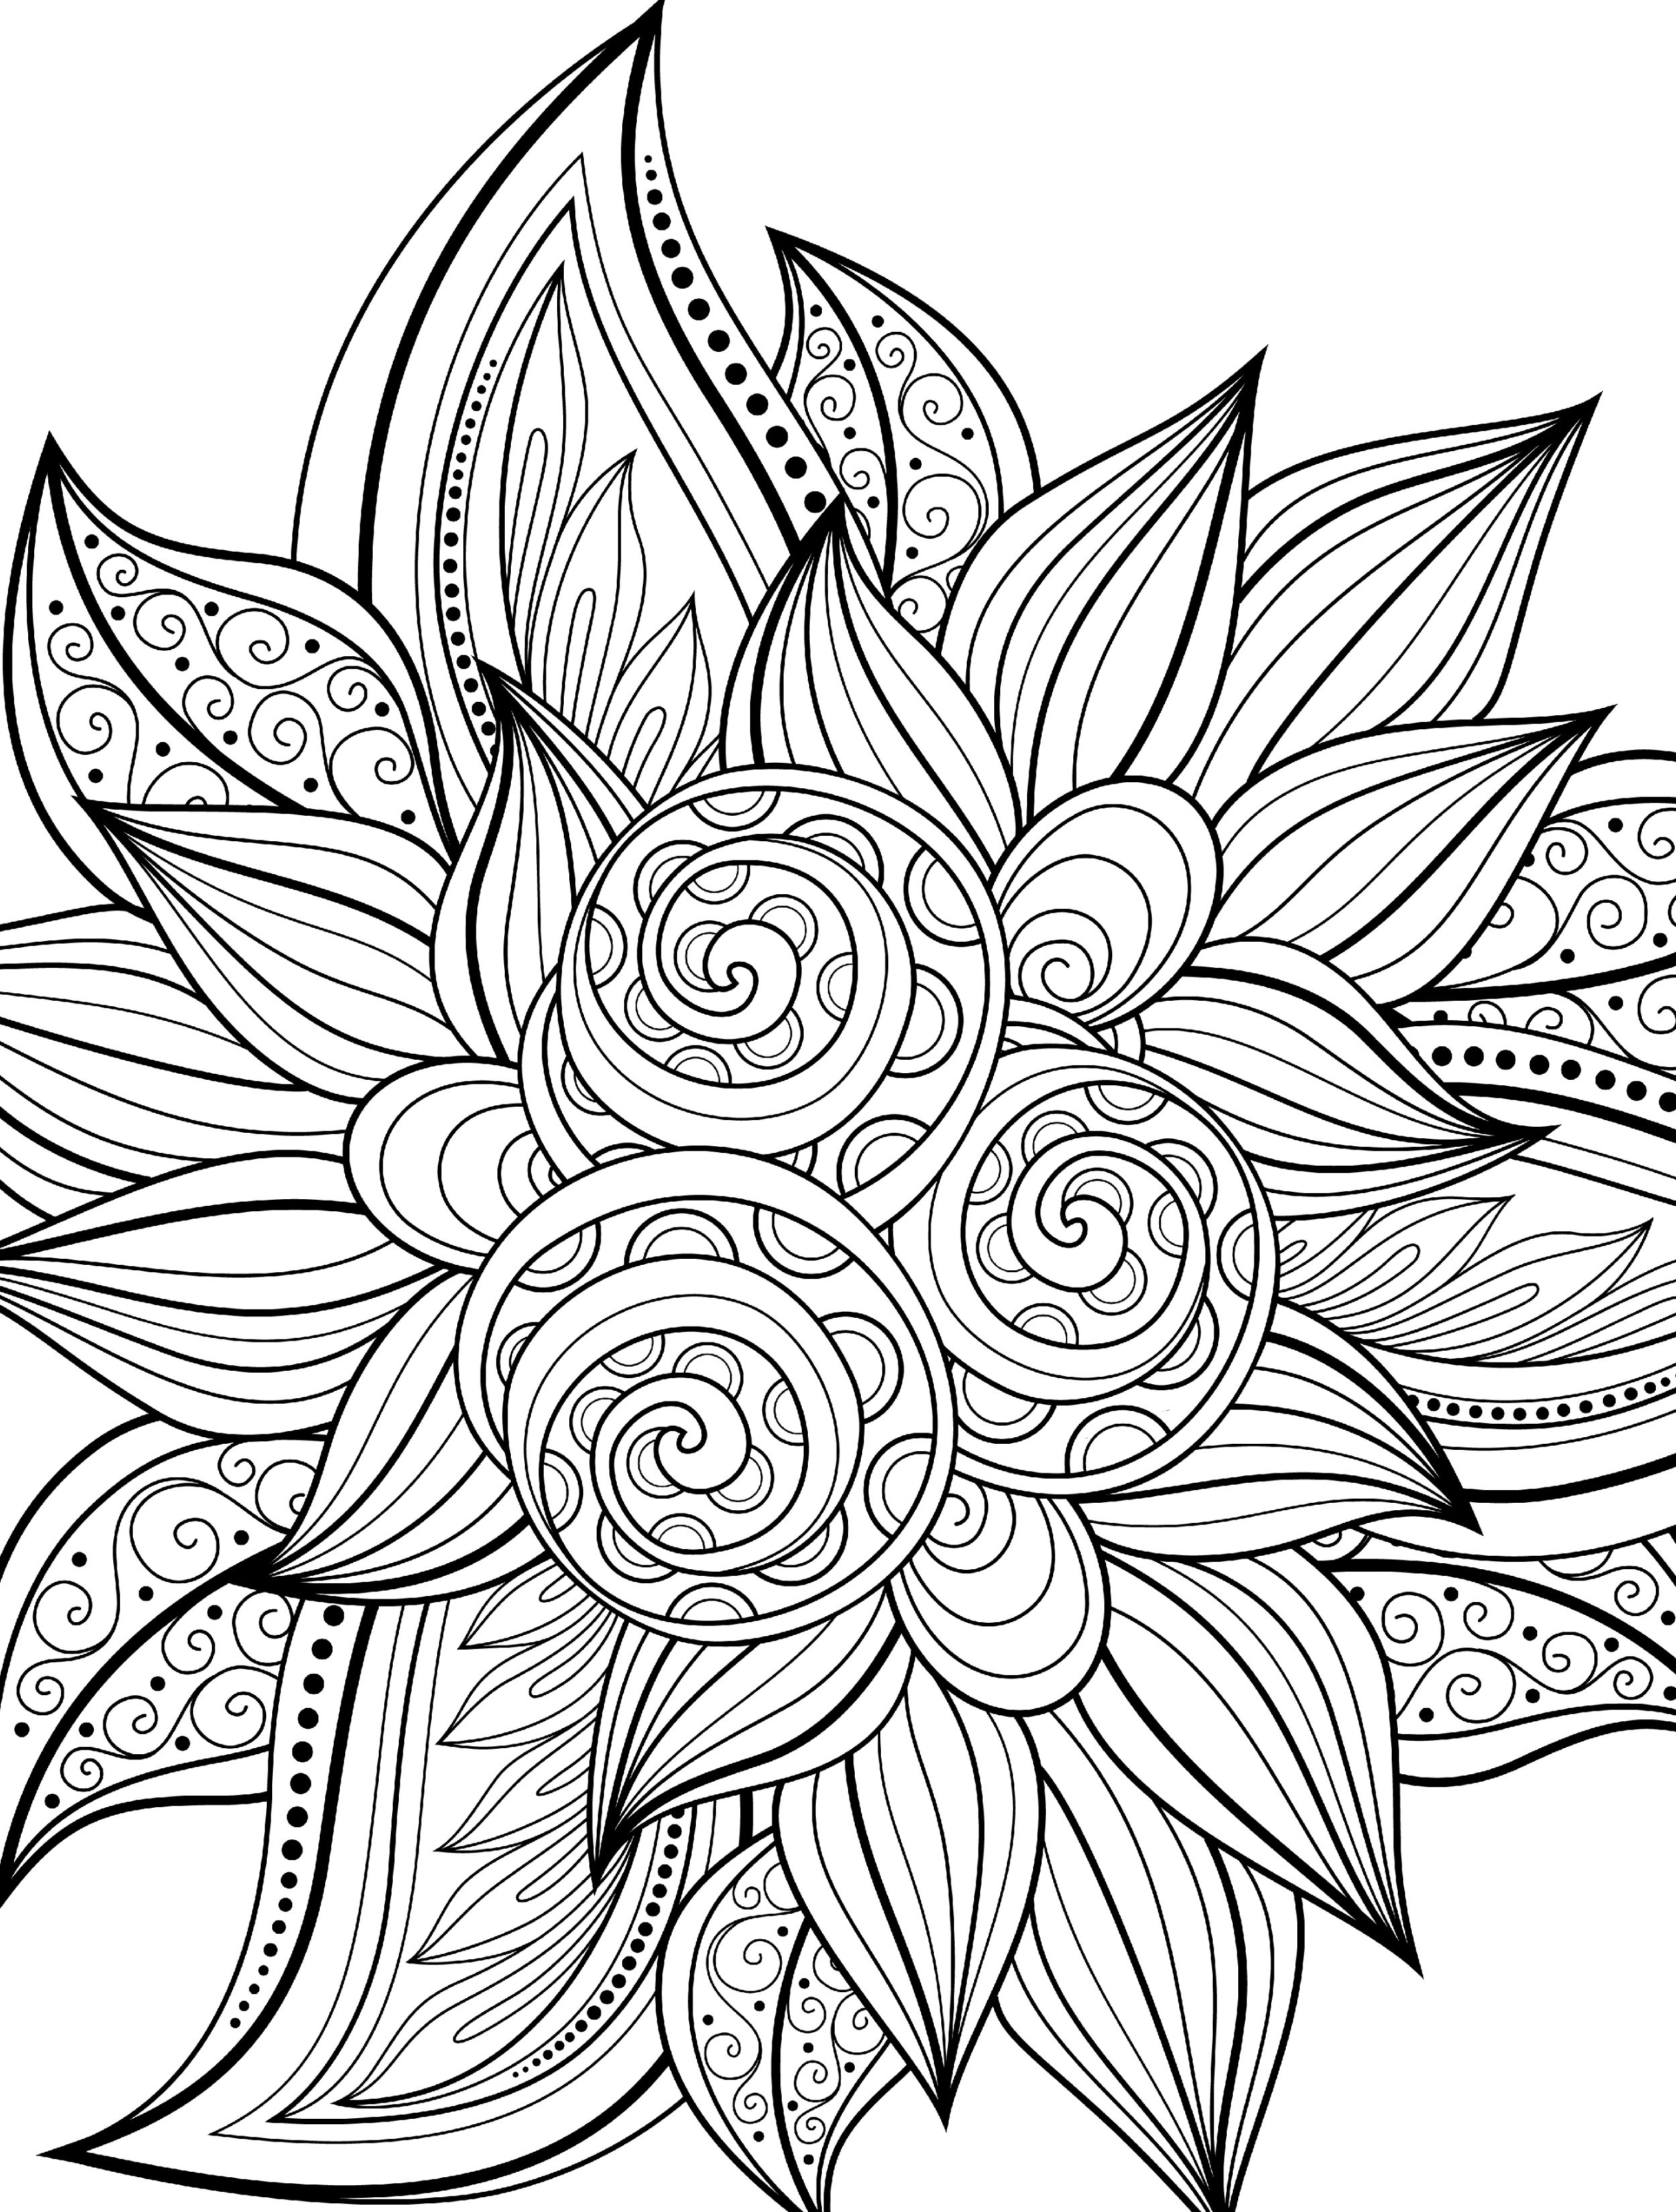 Printable Adult Coloring Pages Free
 10 Free Printable Holiday Adult Coloring Pages